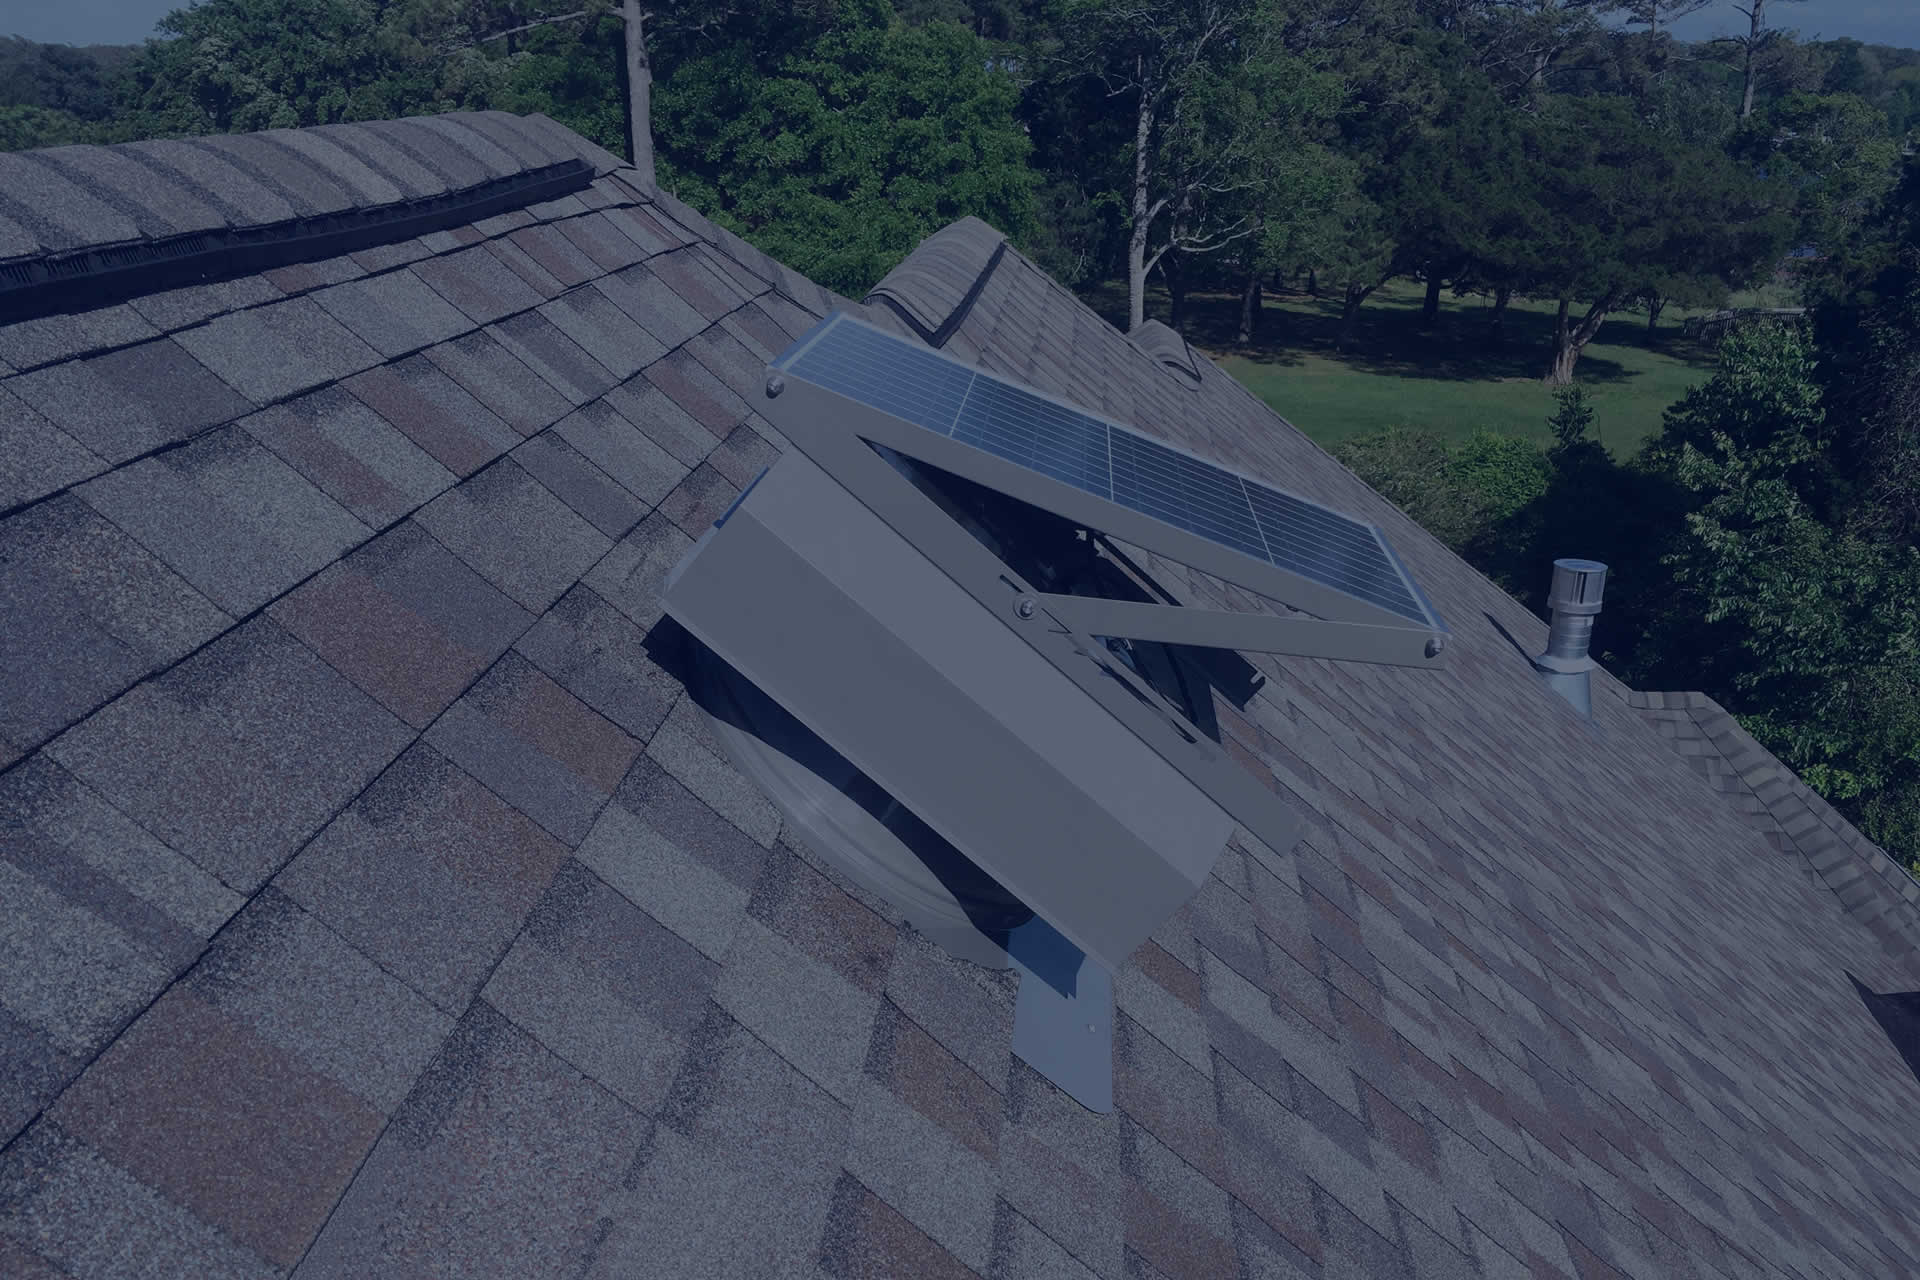 Solar attic fans are the latest technology in roof ventilation and green building standards.